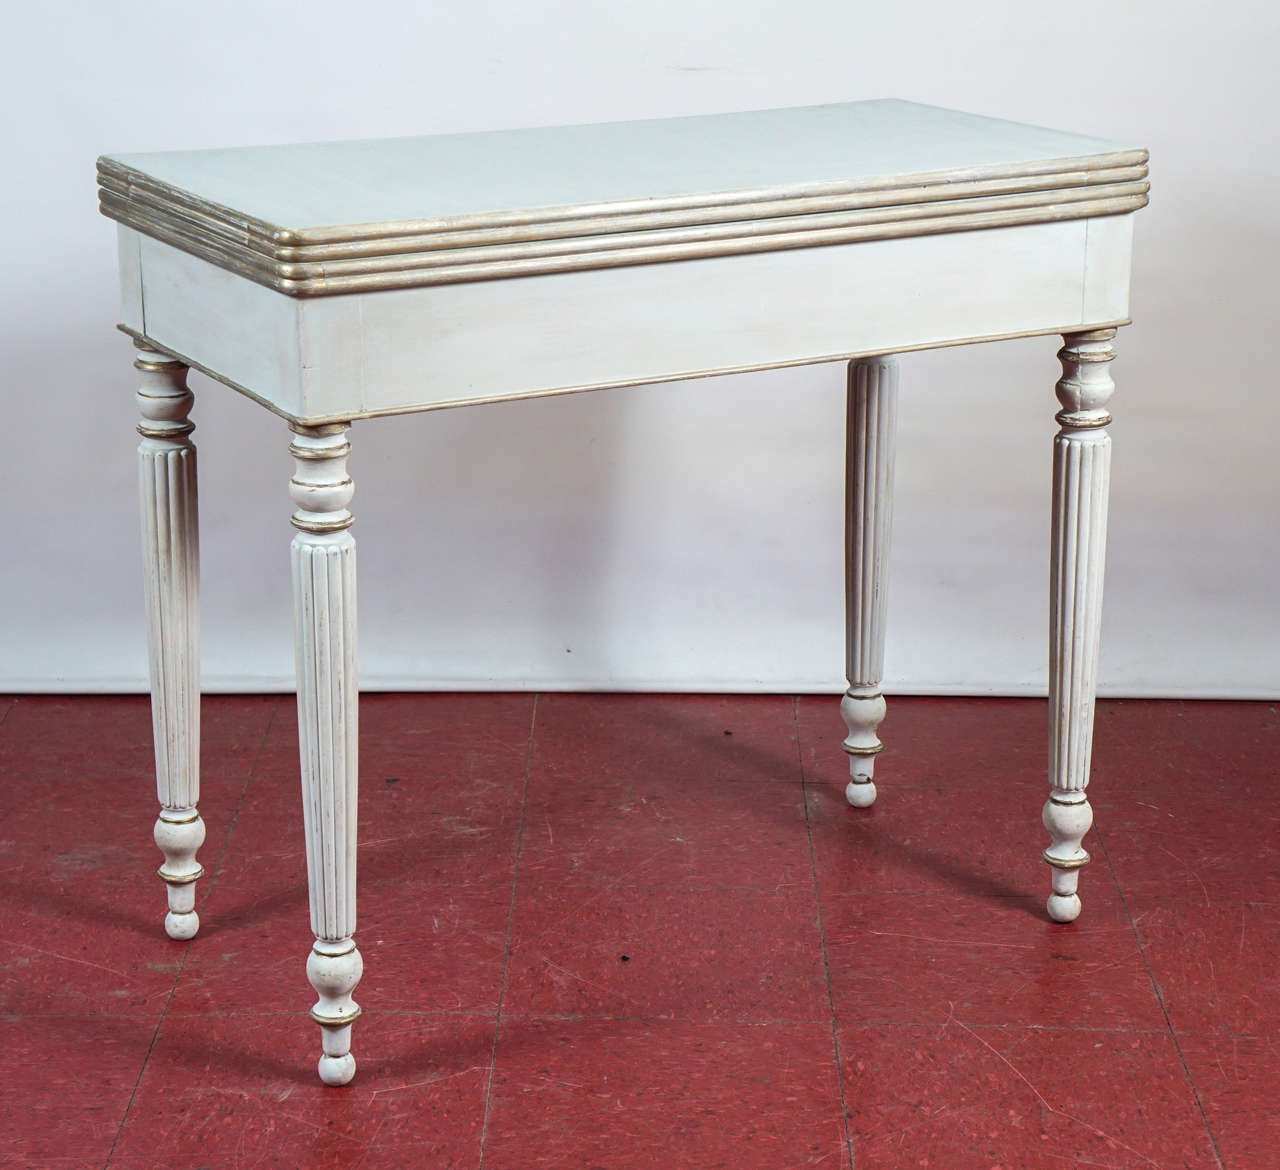 Set against a wall as a console or lamp table, the top unfolds and the back legs slide to fully support the unfolded half of a square card table, seating four players comfortably. The wood is mahogany painted white with gilt trim. Fluted and turned